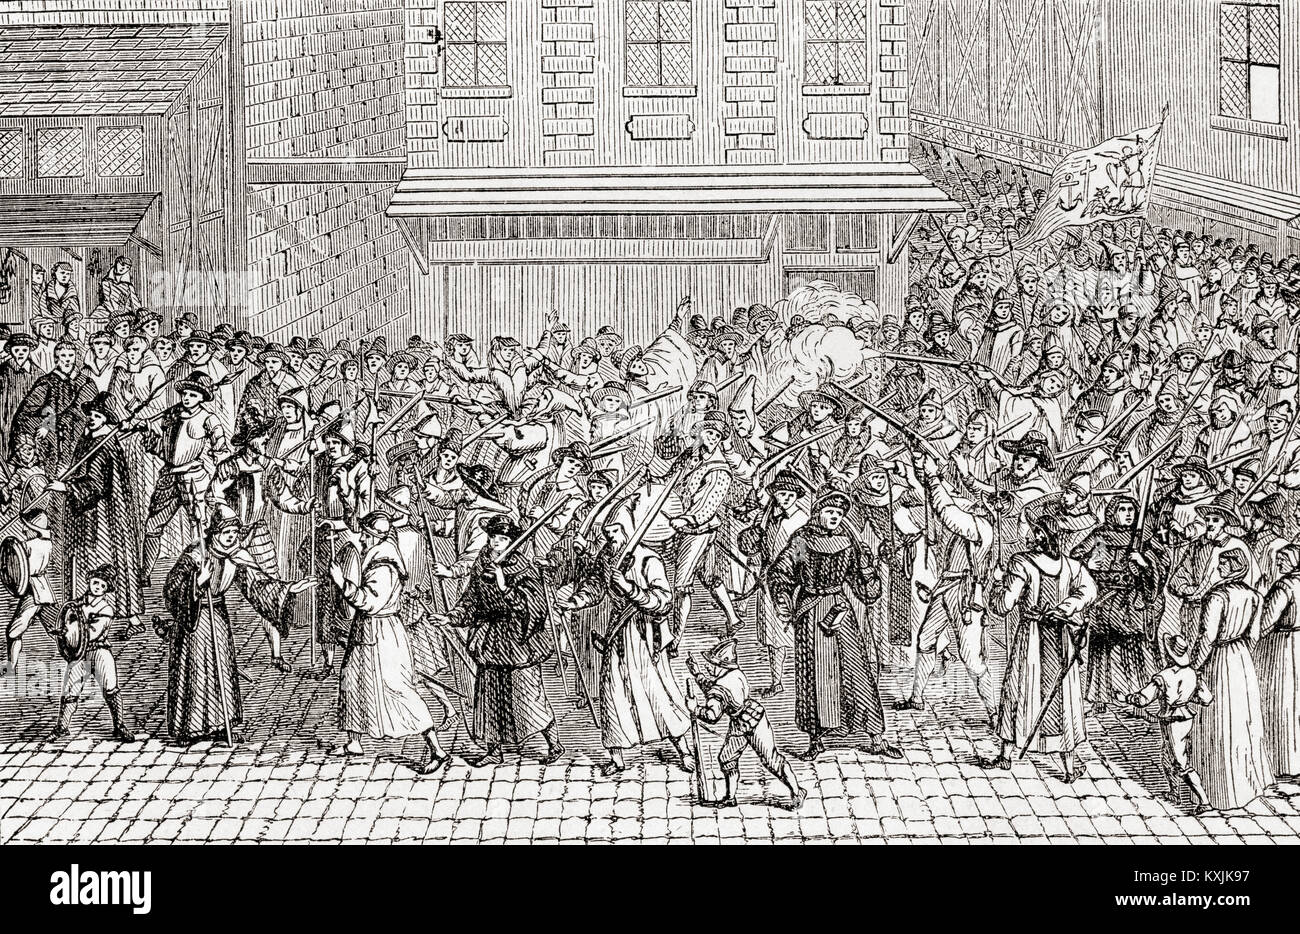 An armed procession of  The Catholic League of France aka Holy League.  Formed by Henry I, Duke of Guise in 1576, the League intended the eradication of Protestants out of Catholic France during the Protestant Reformation, as well as the replacement of King Henry III.  From Ward and Lock's Illustrated History of the World, published c.1882. Stock Photo